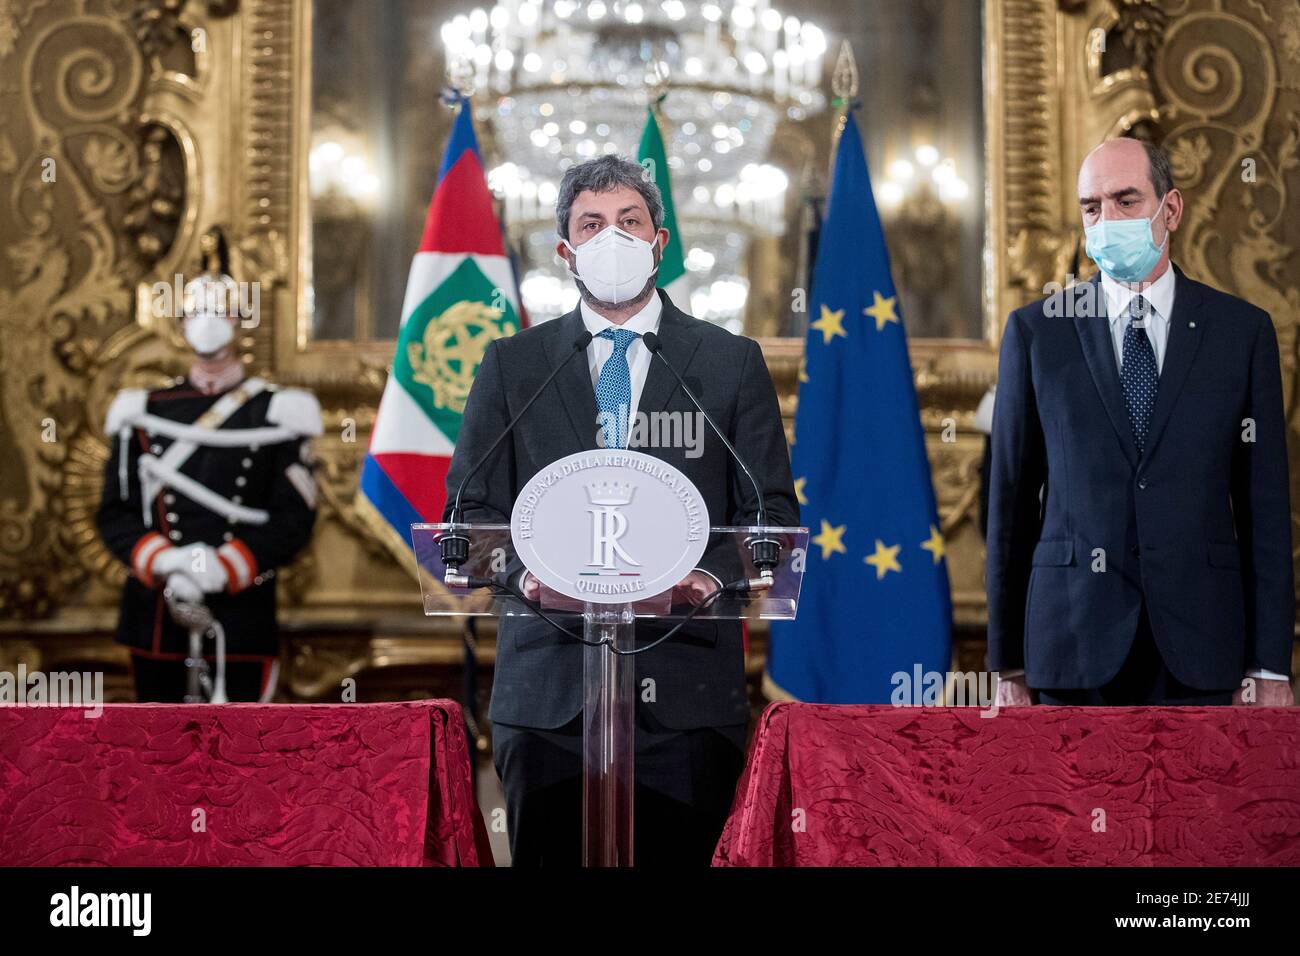 Rome, Italy. 29th Jan 2021. (210129) -- ROME, Jan. 29, 2021 (Xinhua) -- President of the Italian Chamber of Deputies Roberto Fico (C) speaks to the media at the Quirinale Palace in Rome, Italy, on Jan. 29, 2021. Italian President Sergio Mattarella has given House Speaker Roberto Fico an exploratory mandate to verify whether the same governing majority that existed before Prime Minister Giuseppe Conte resigned on Jan. 26 is still workable. (Pool via Xinhua) Credit: Xinhua/Alamy Live News Stock Photo